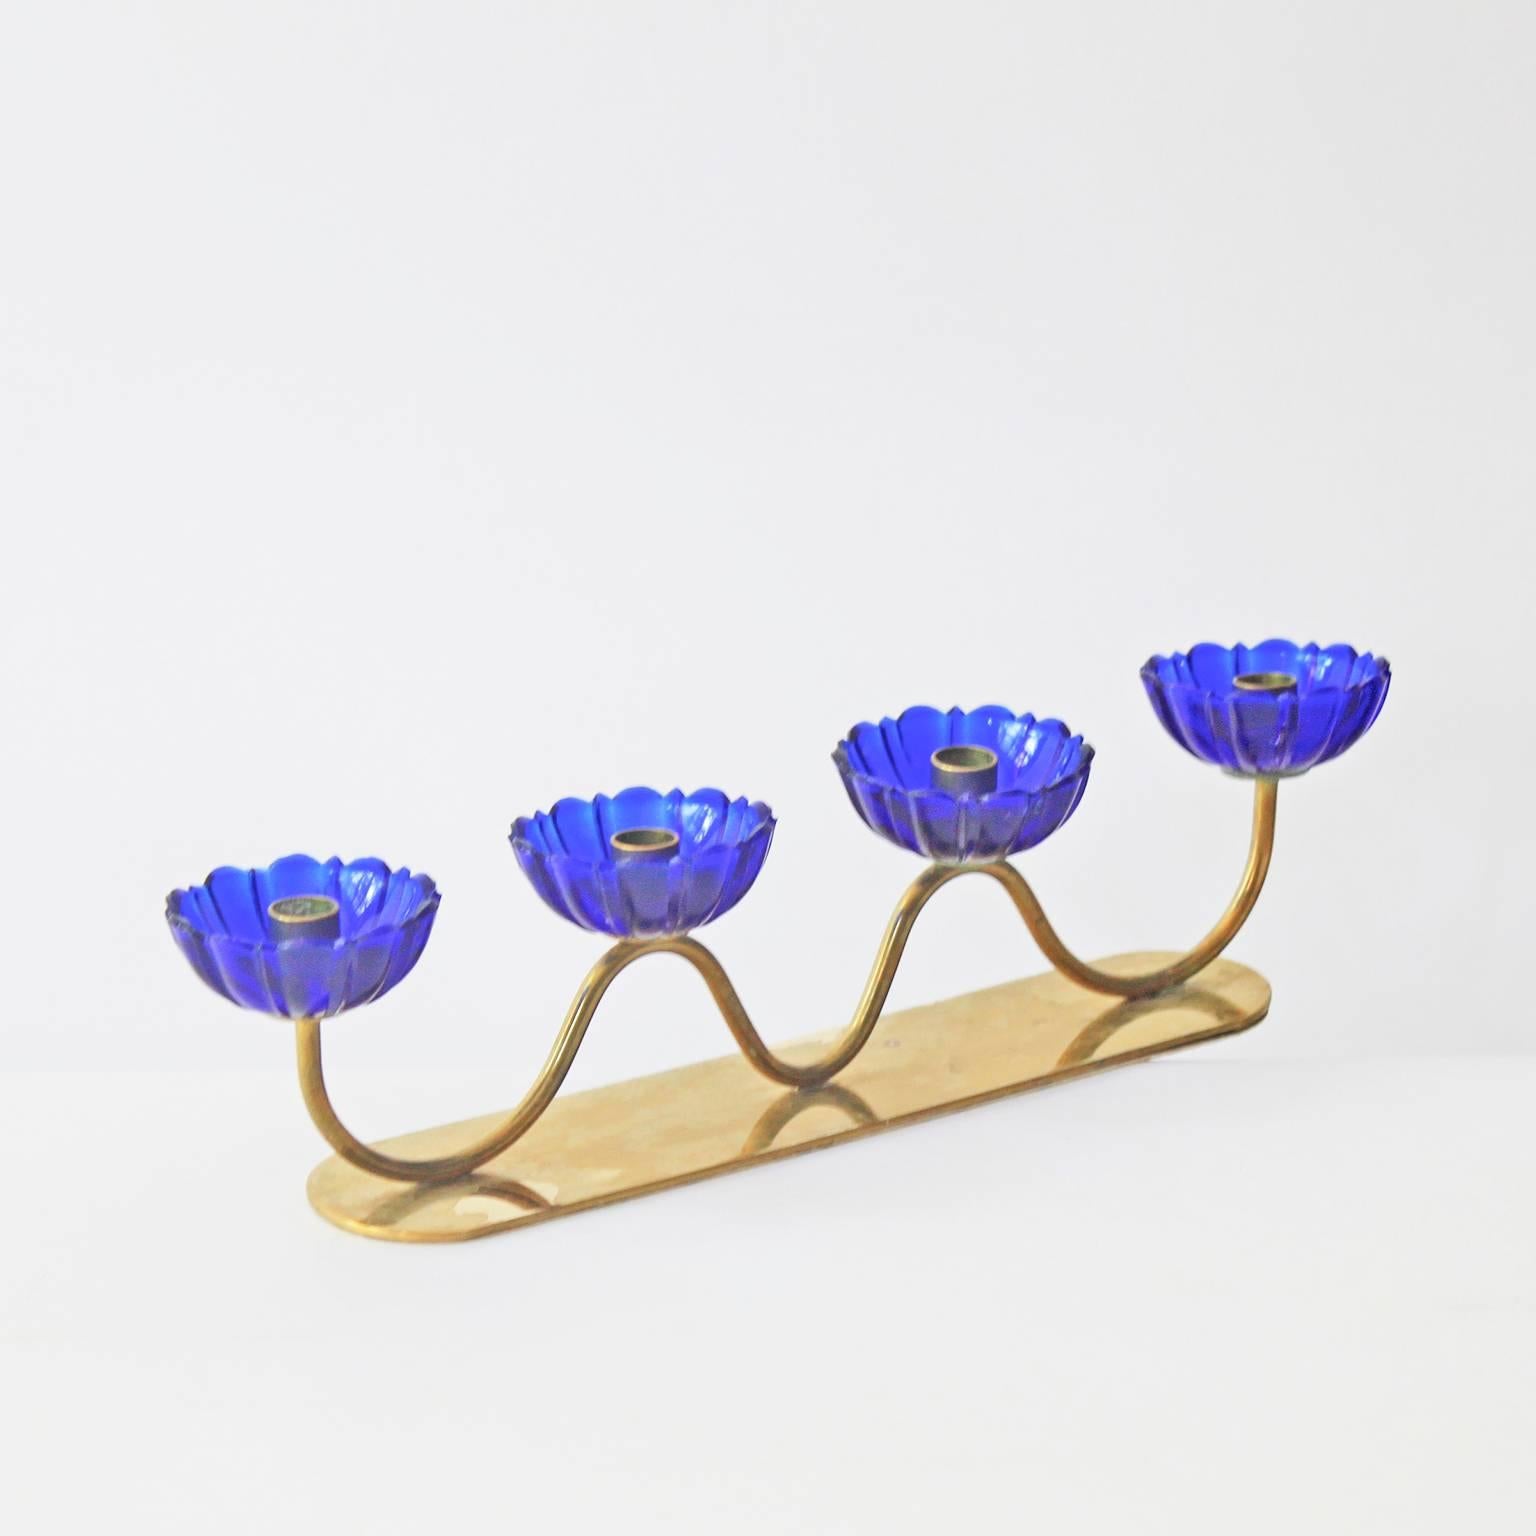 A series of four blue flower candle holders by Gunnar Ander for Ystad-Metall. This piece comprises blue flowers on an undulating base of patinated gold-plated brass.